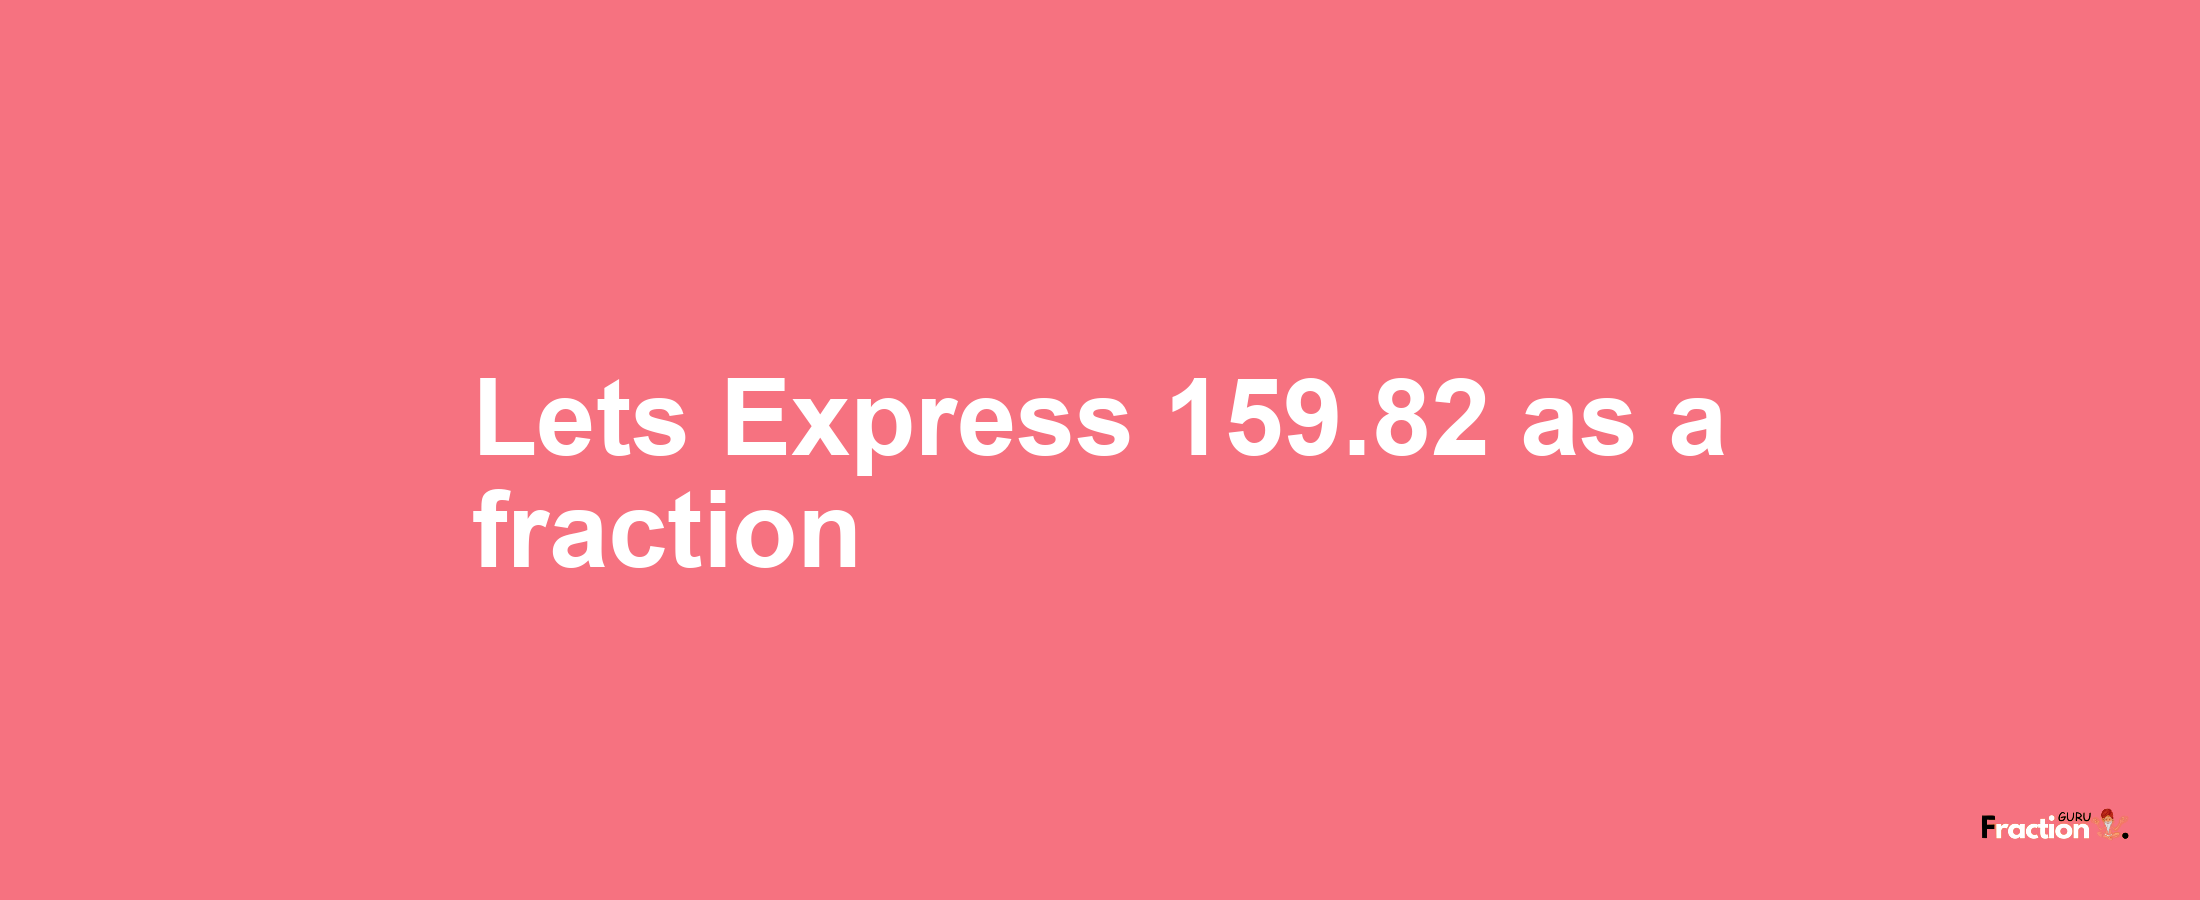 Lets Express 159.82 as afraction